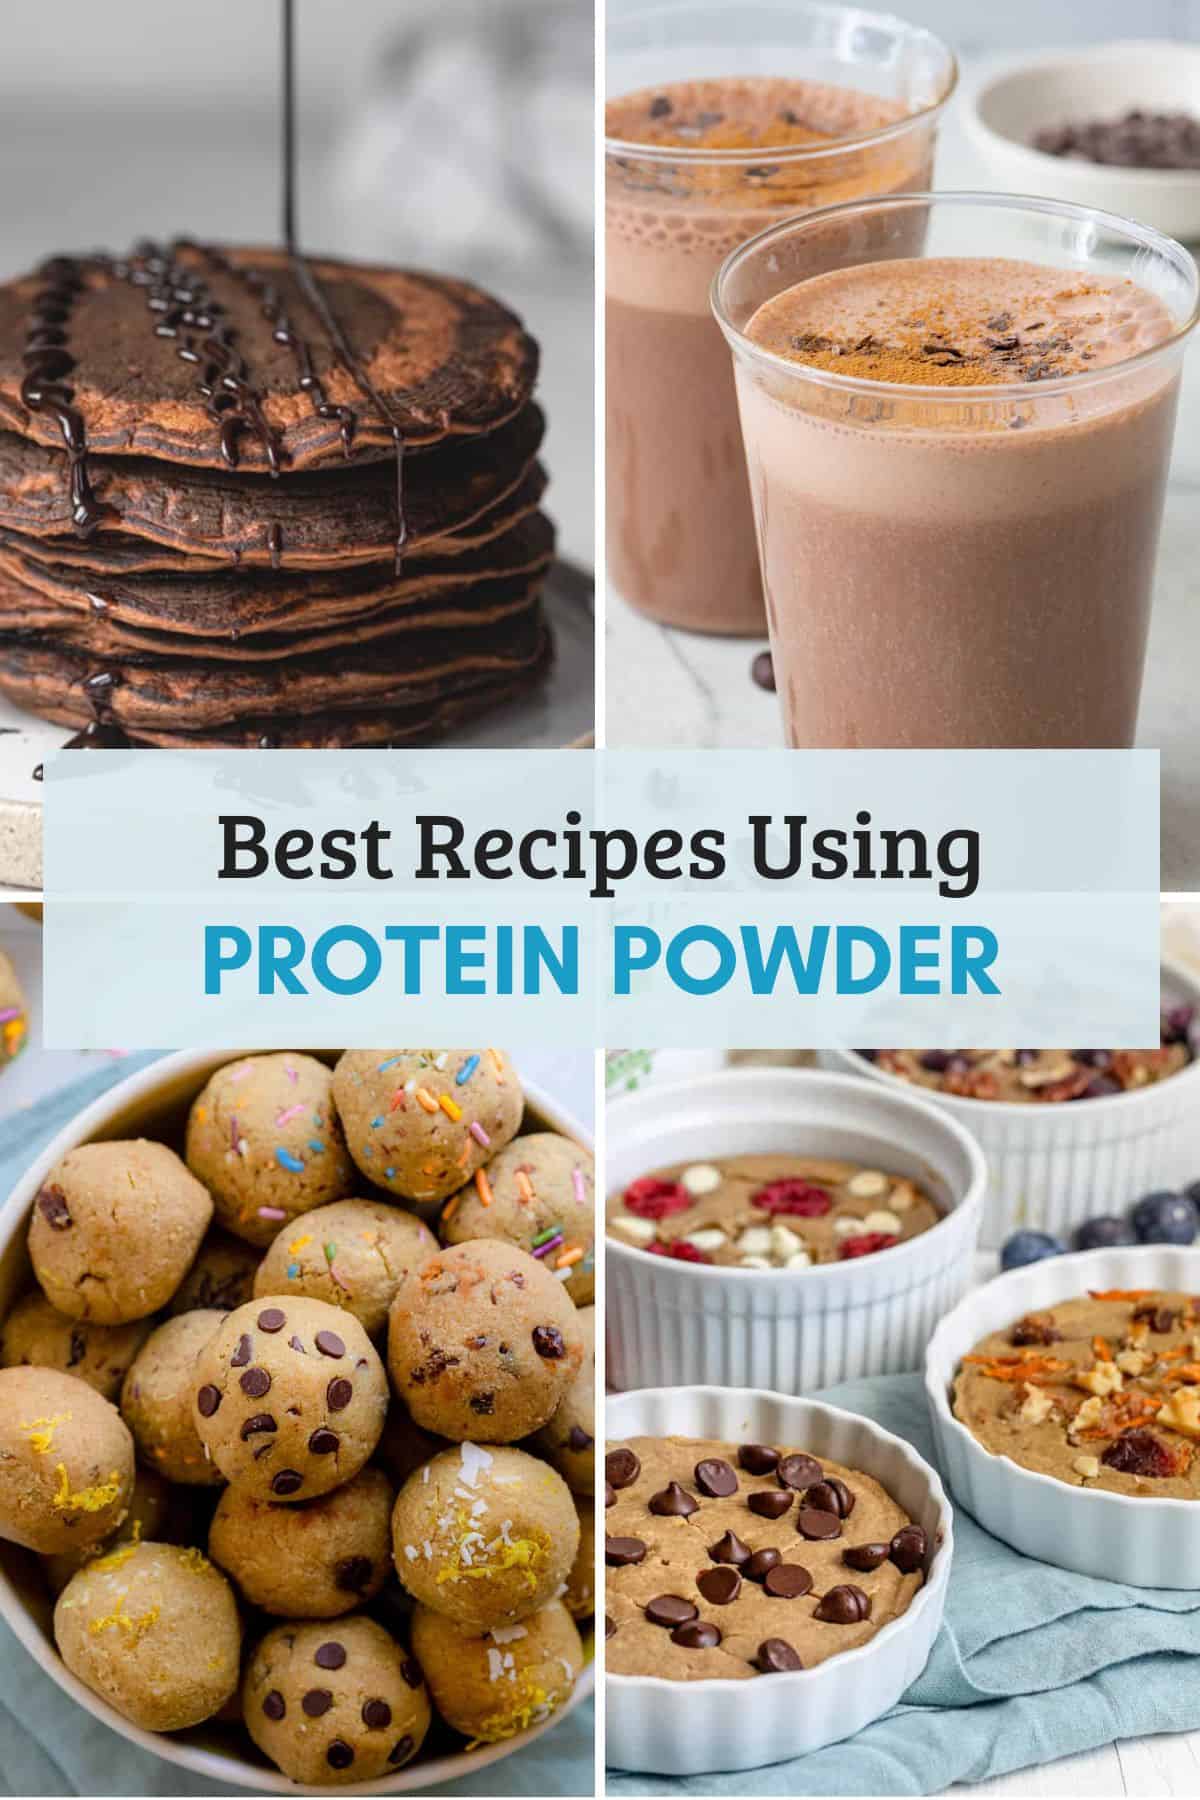 Featured image for the best recipes using protein powder.